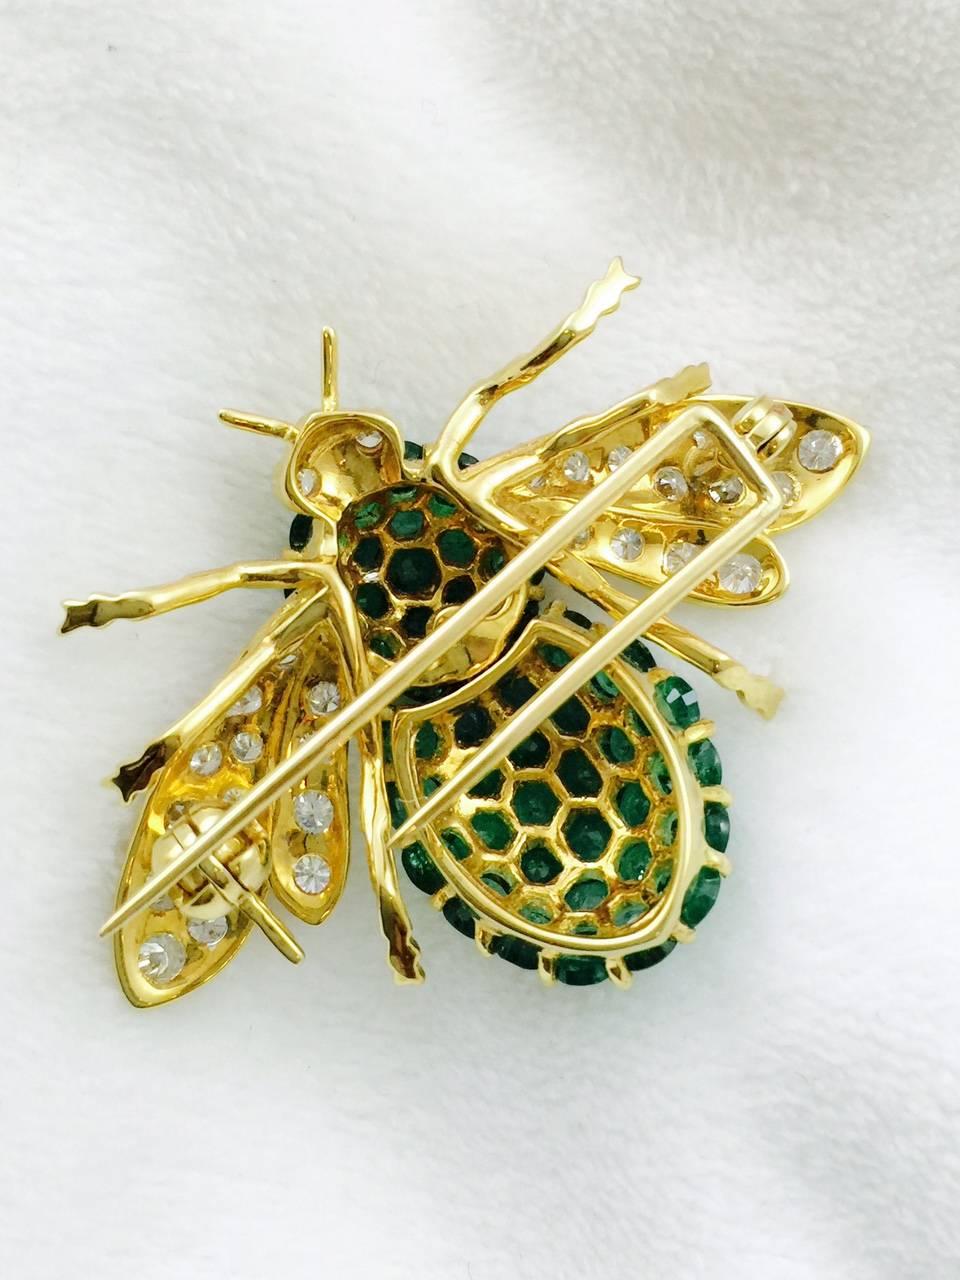 What's the buzz all about? It's all about this incredibly stunning brooch!  Artfully crafted in 18 karat yellow gold this little beauty has a body encrusted in perfectly matched emeralds having an approximate total weight of 6 carats.   Brilliant